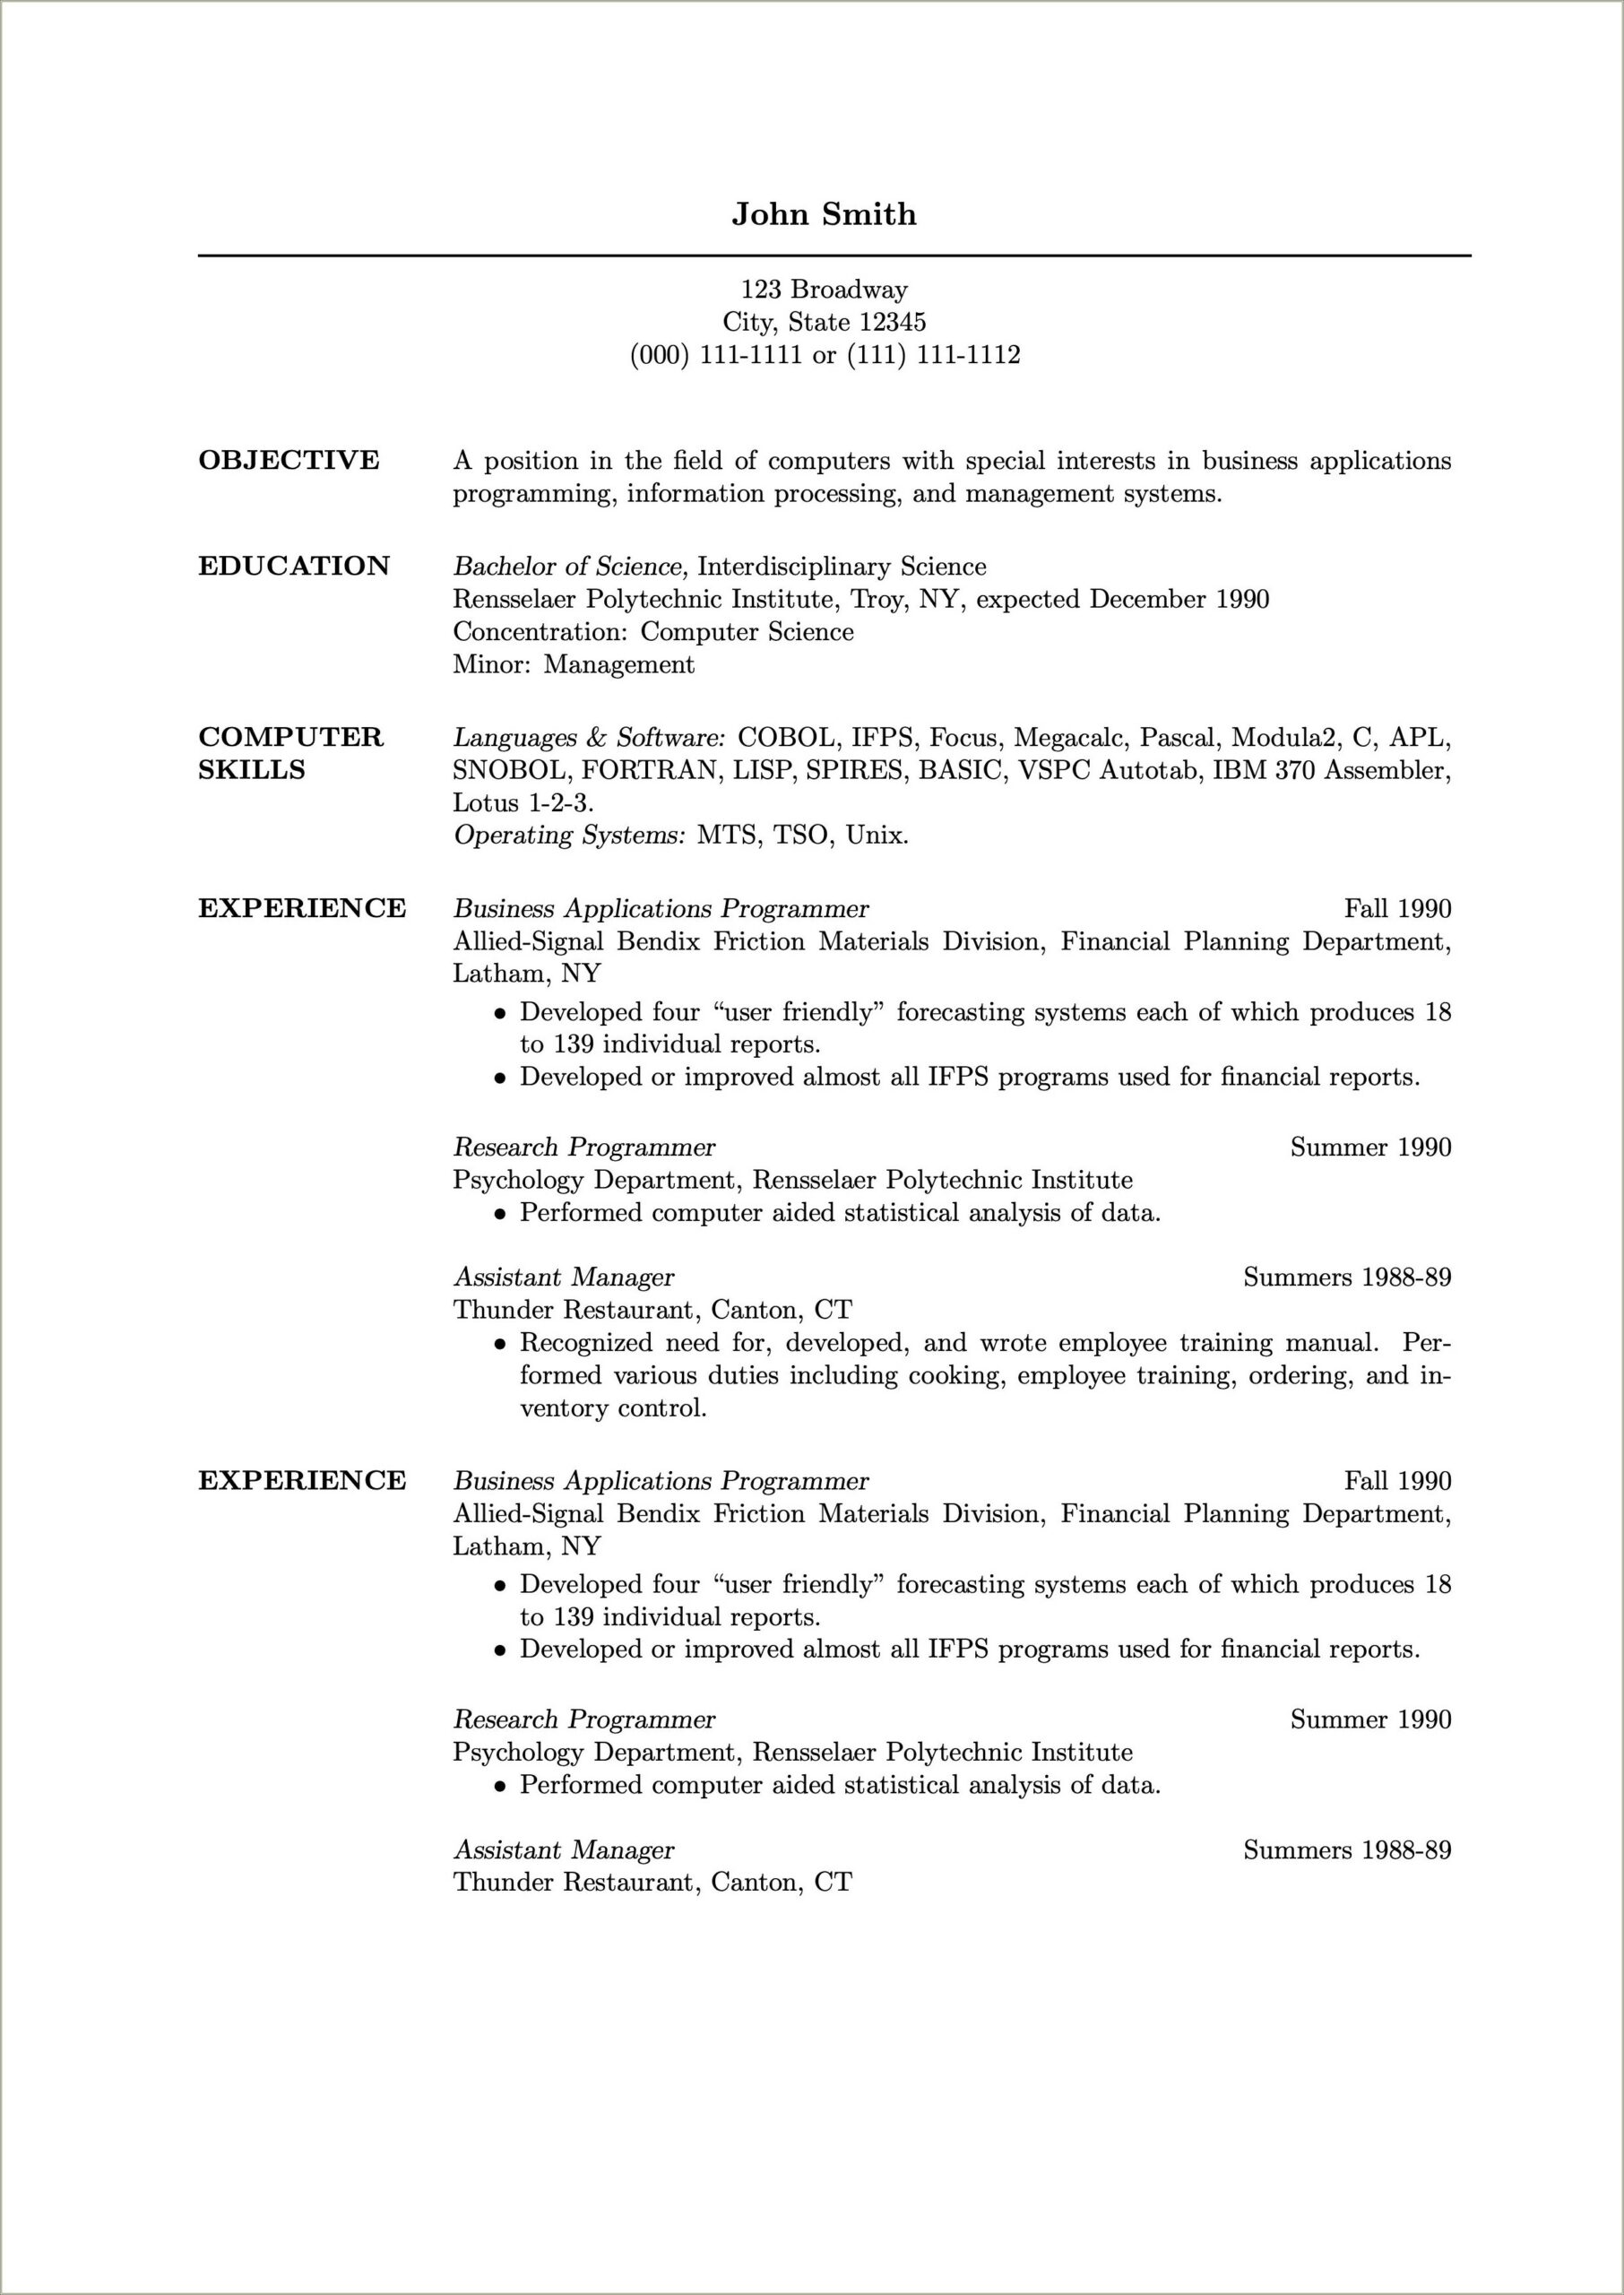 Law School Resume Skills And Interests Section